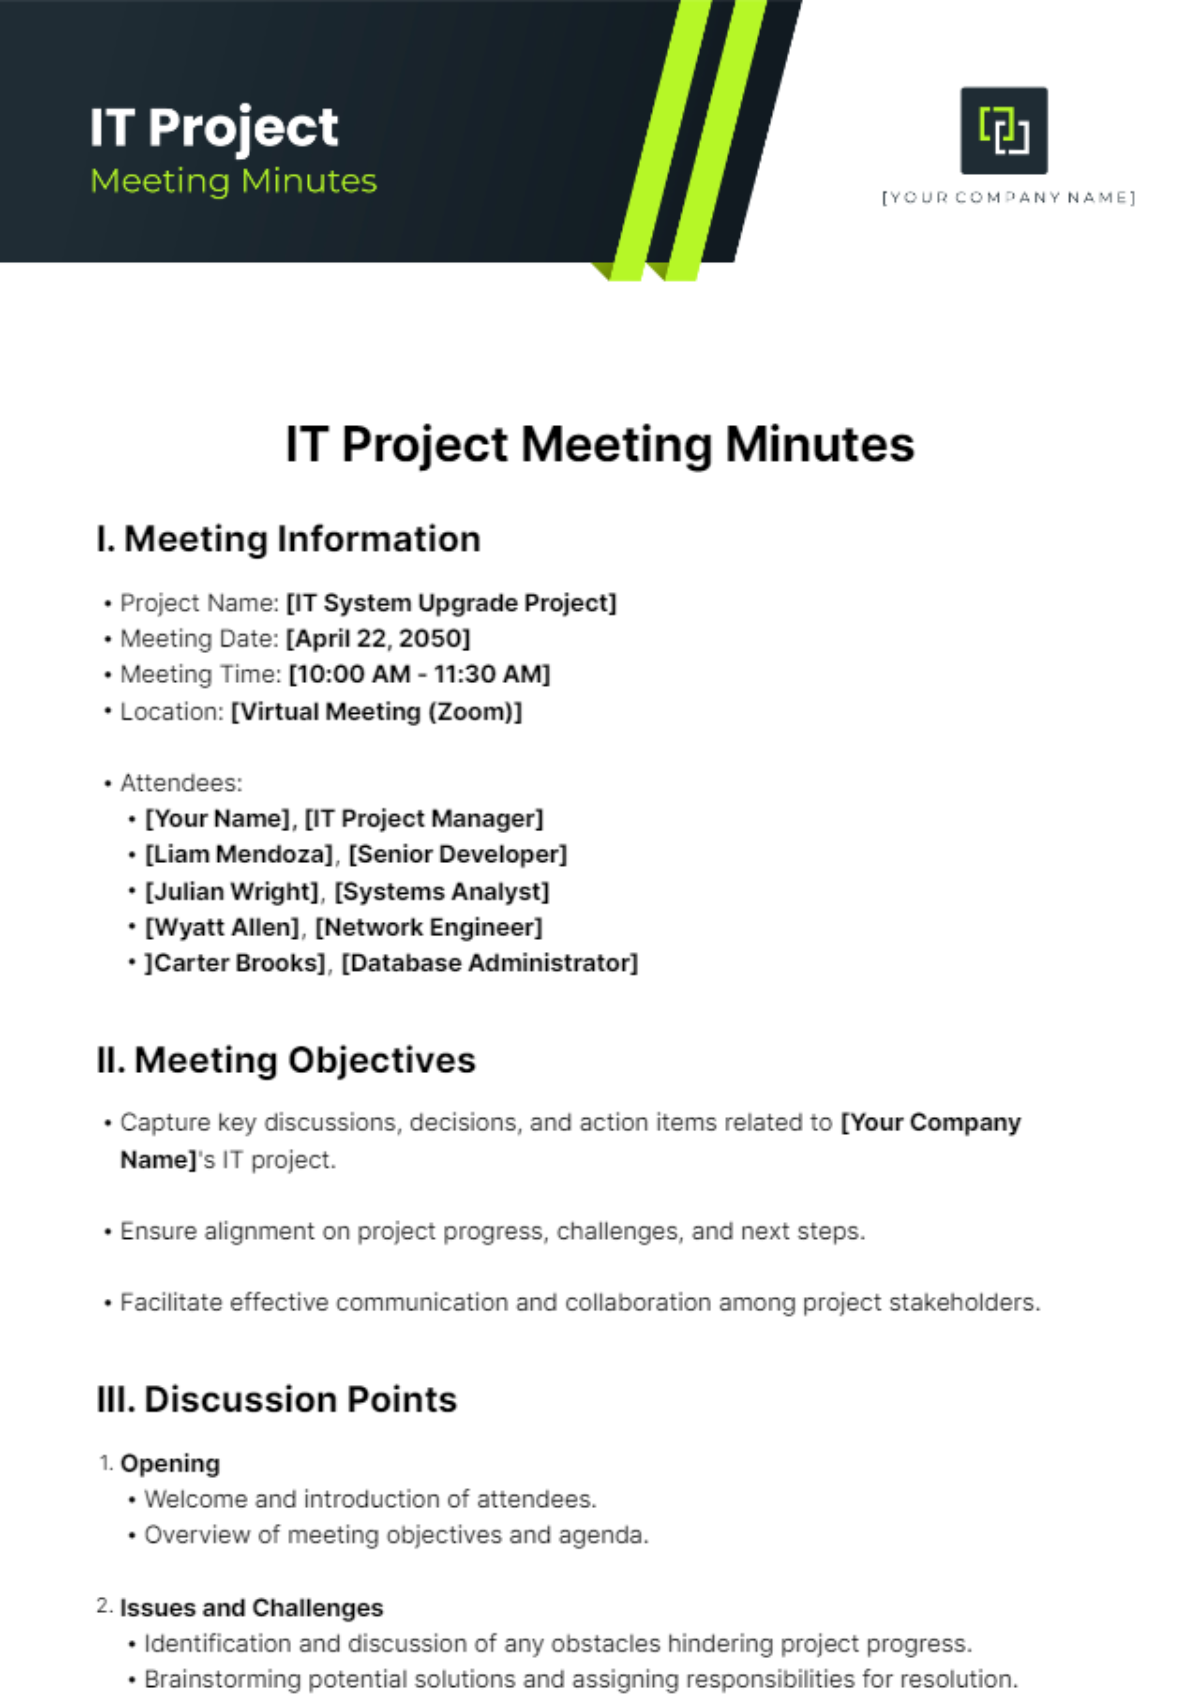 IT Project Meeting Minutes Template